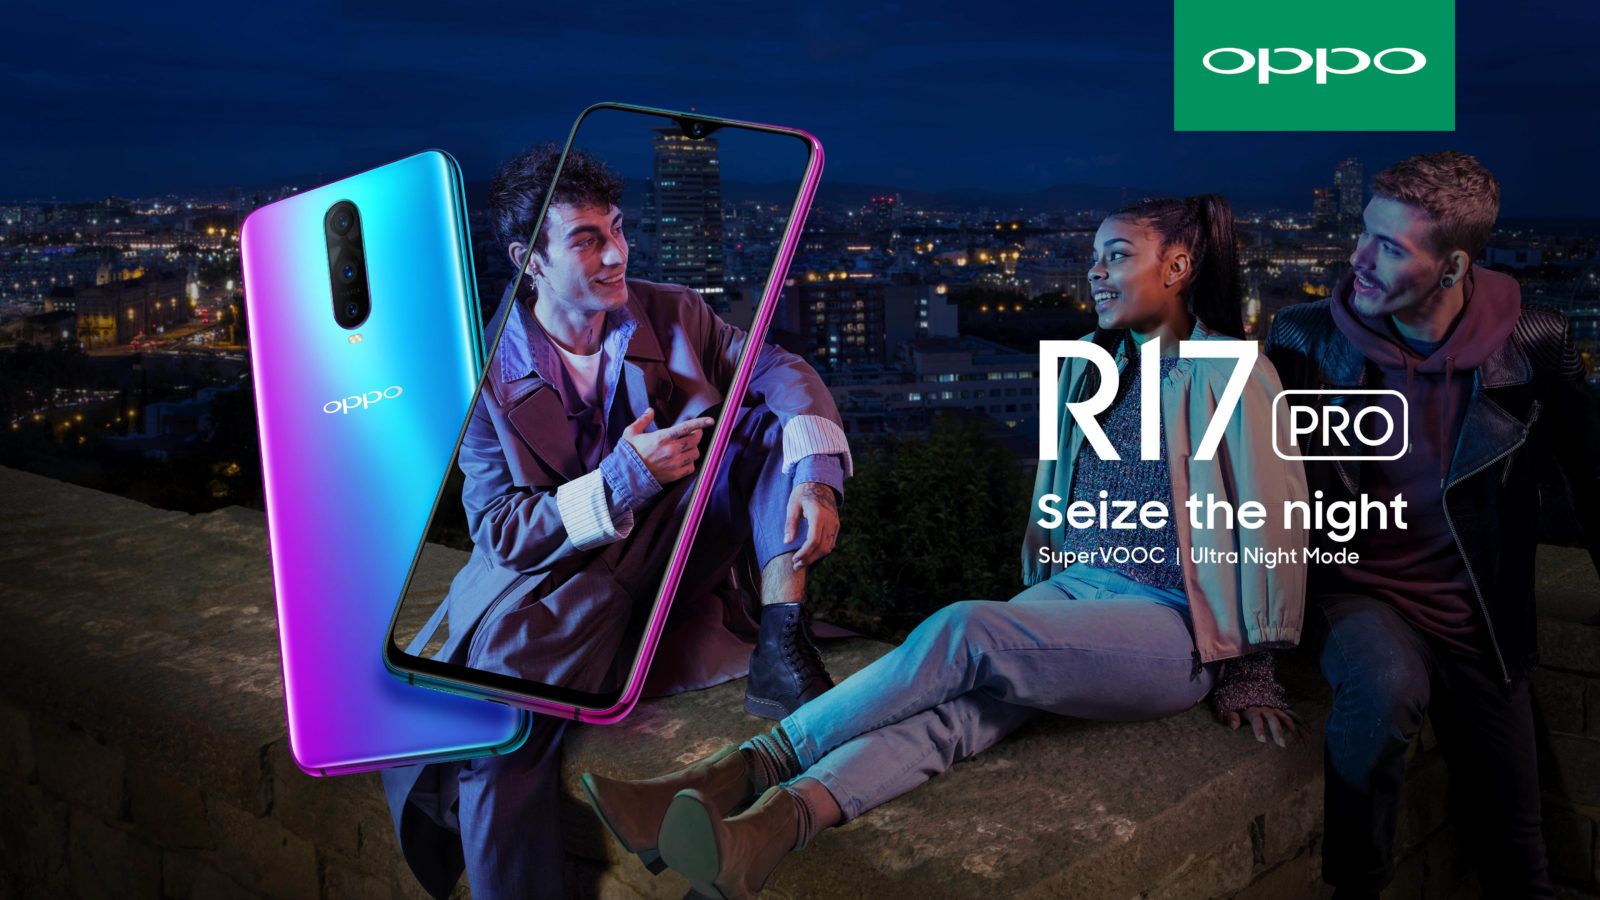 OPPO R17 Pro Seizes More than Just the Night with its Triple Lens Camera